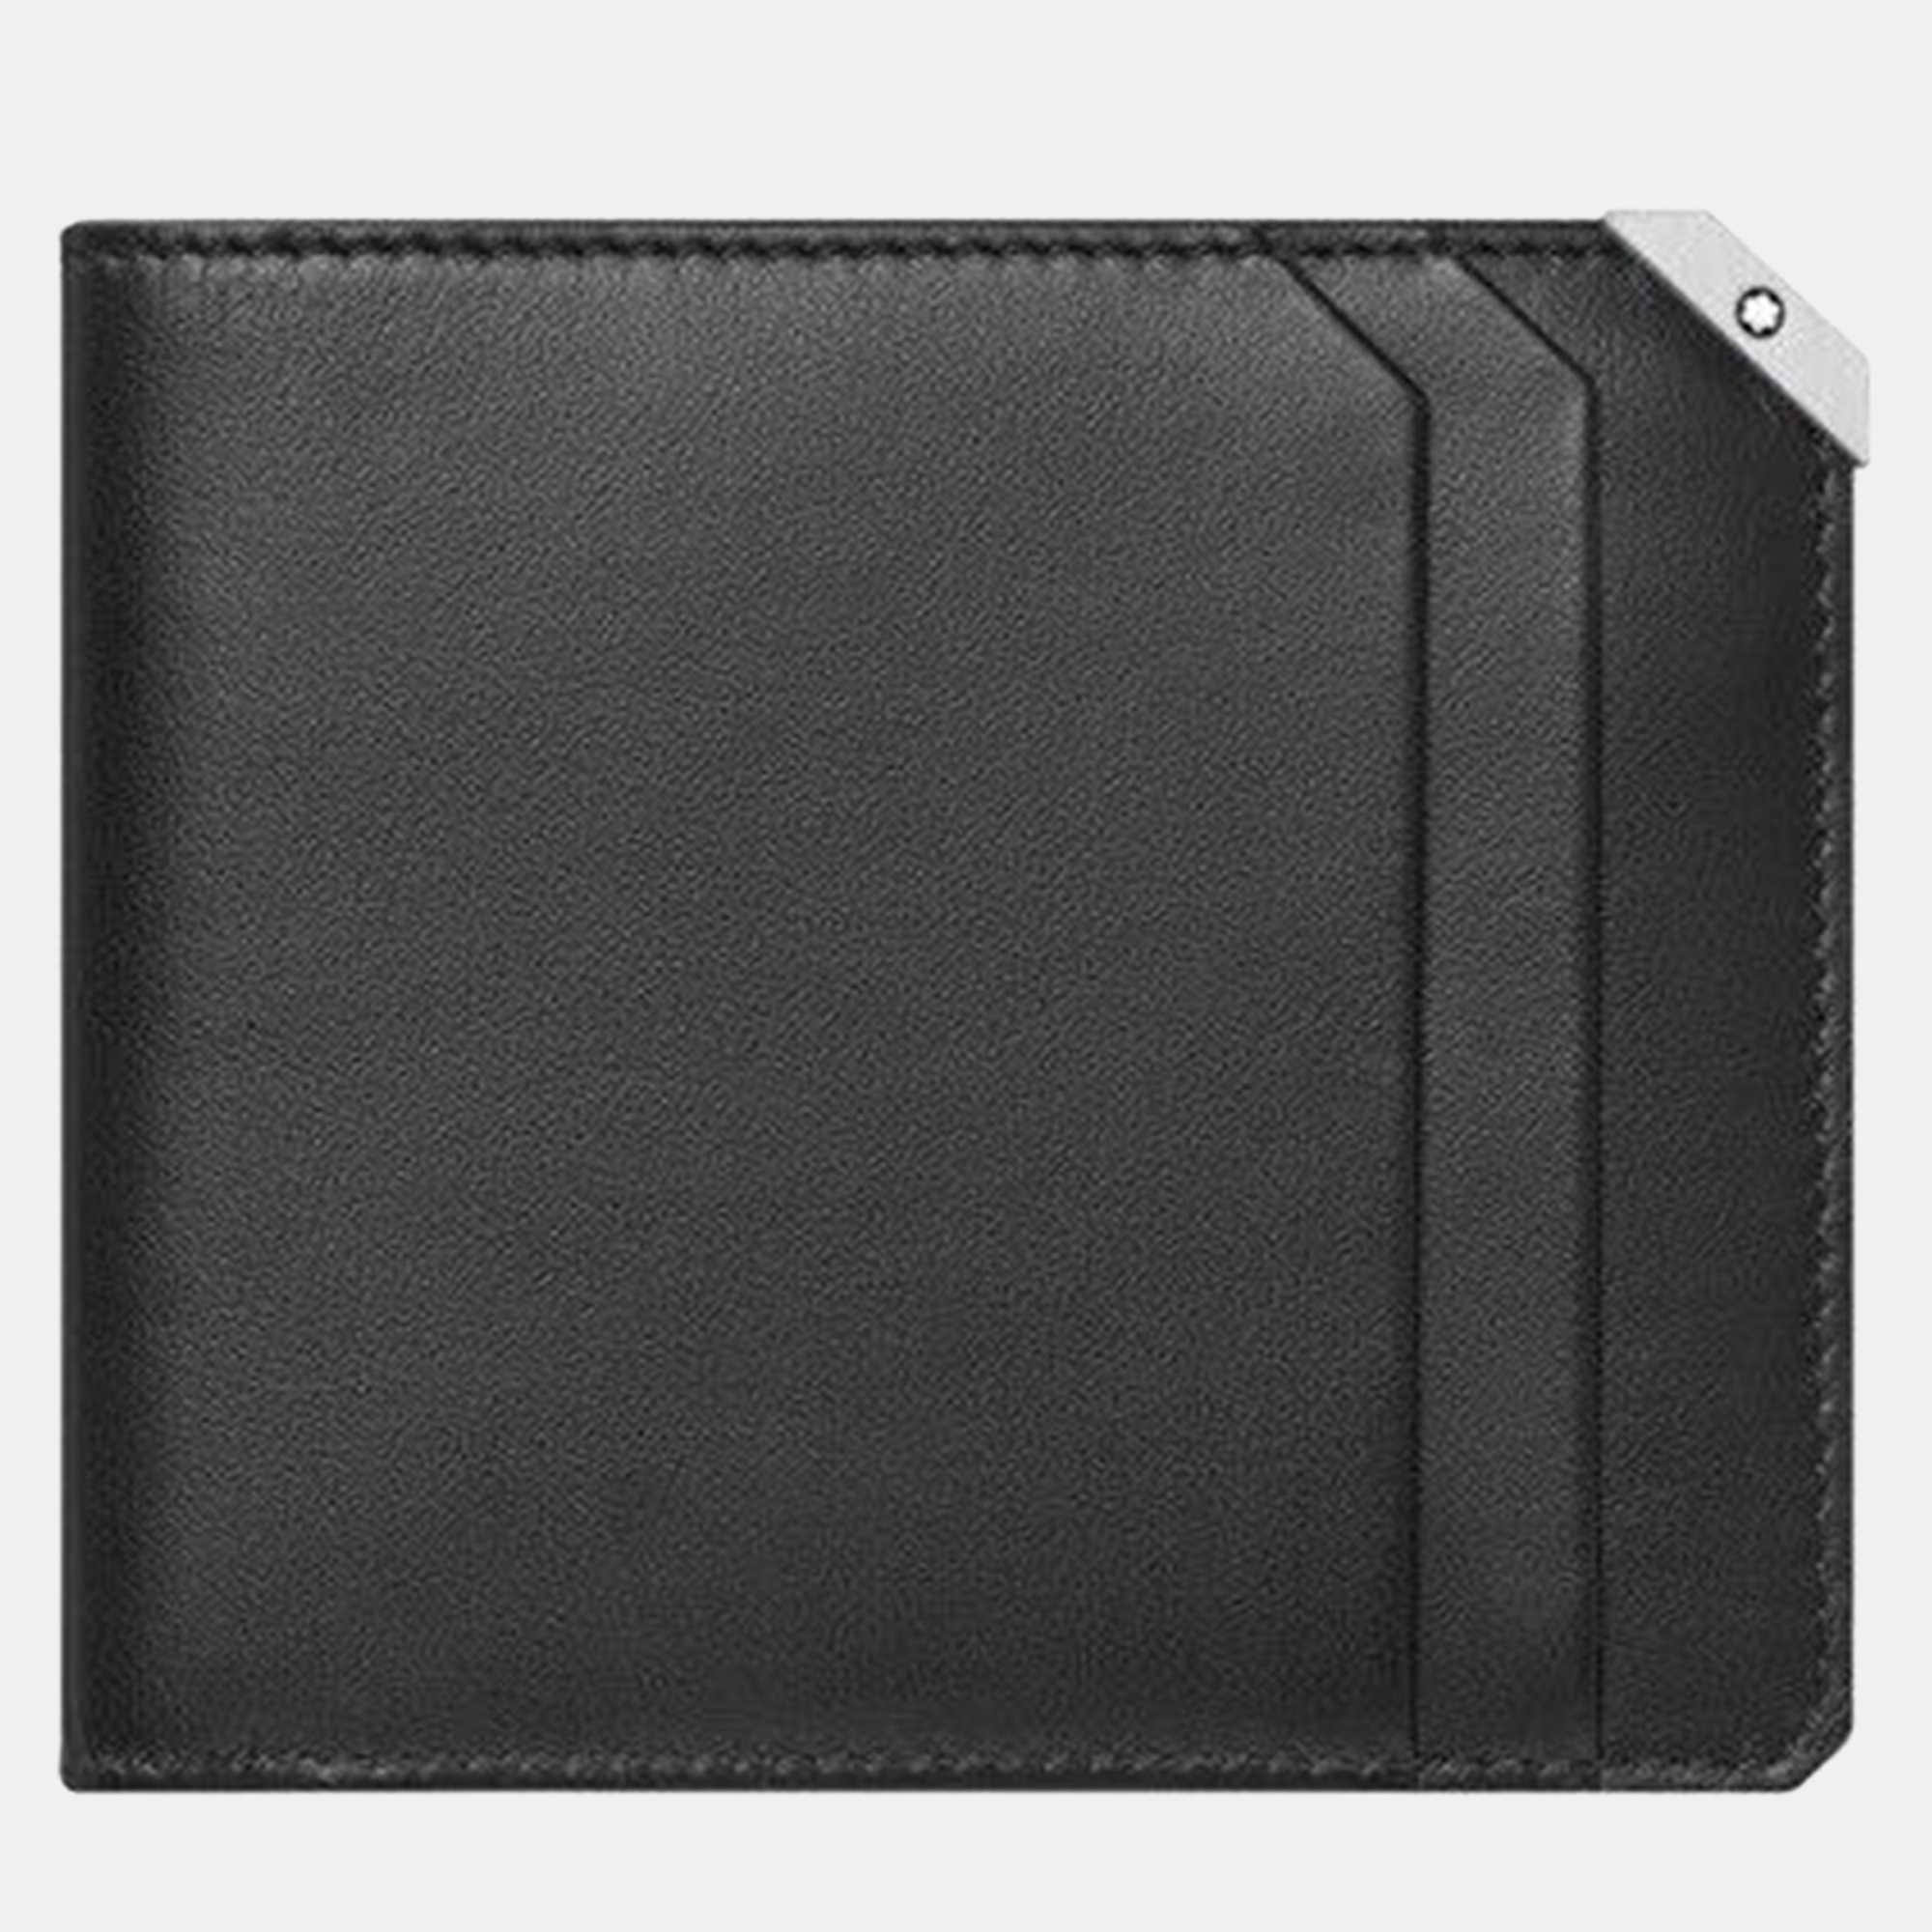 Pre-owned Montblanc Black Leather Wallet